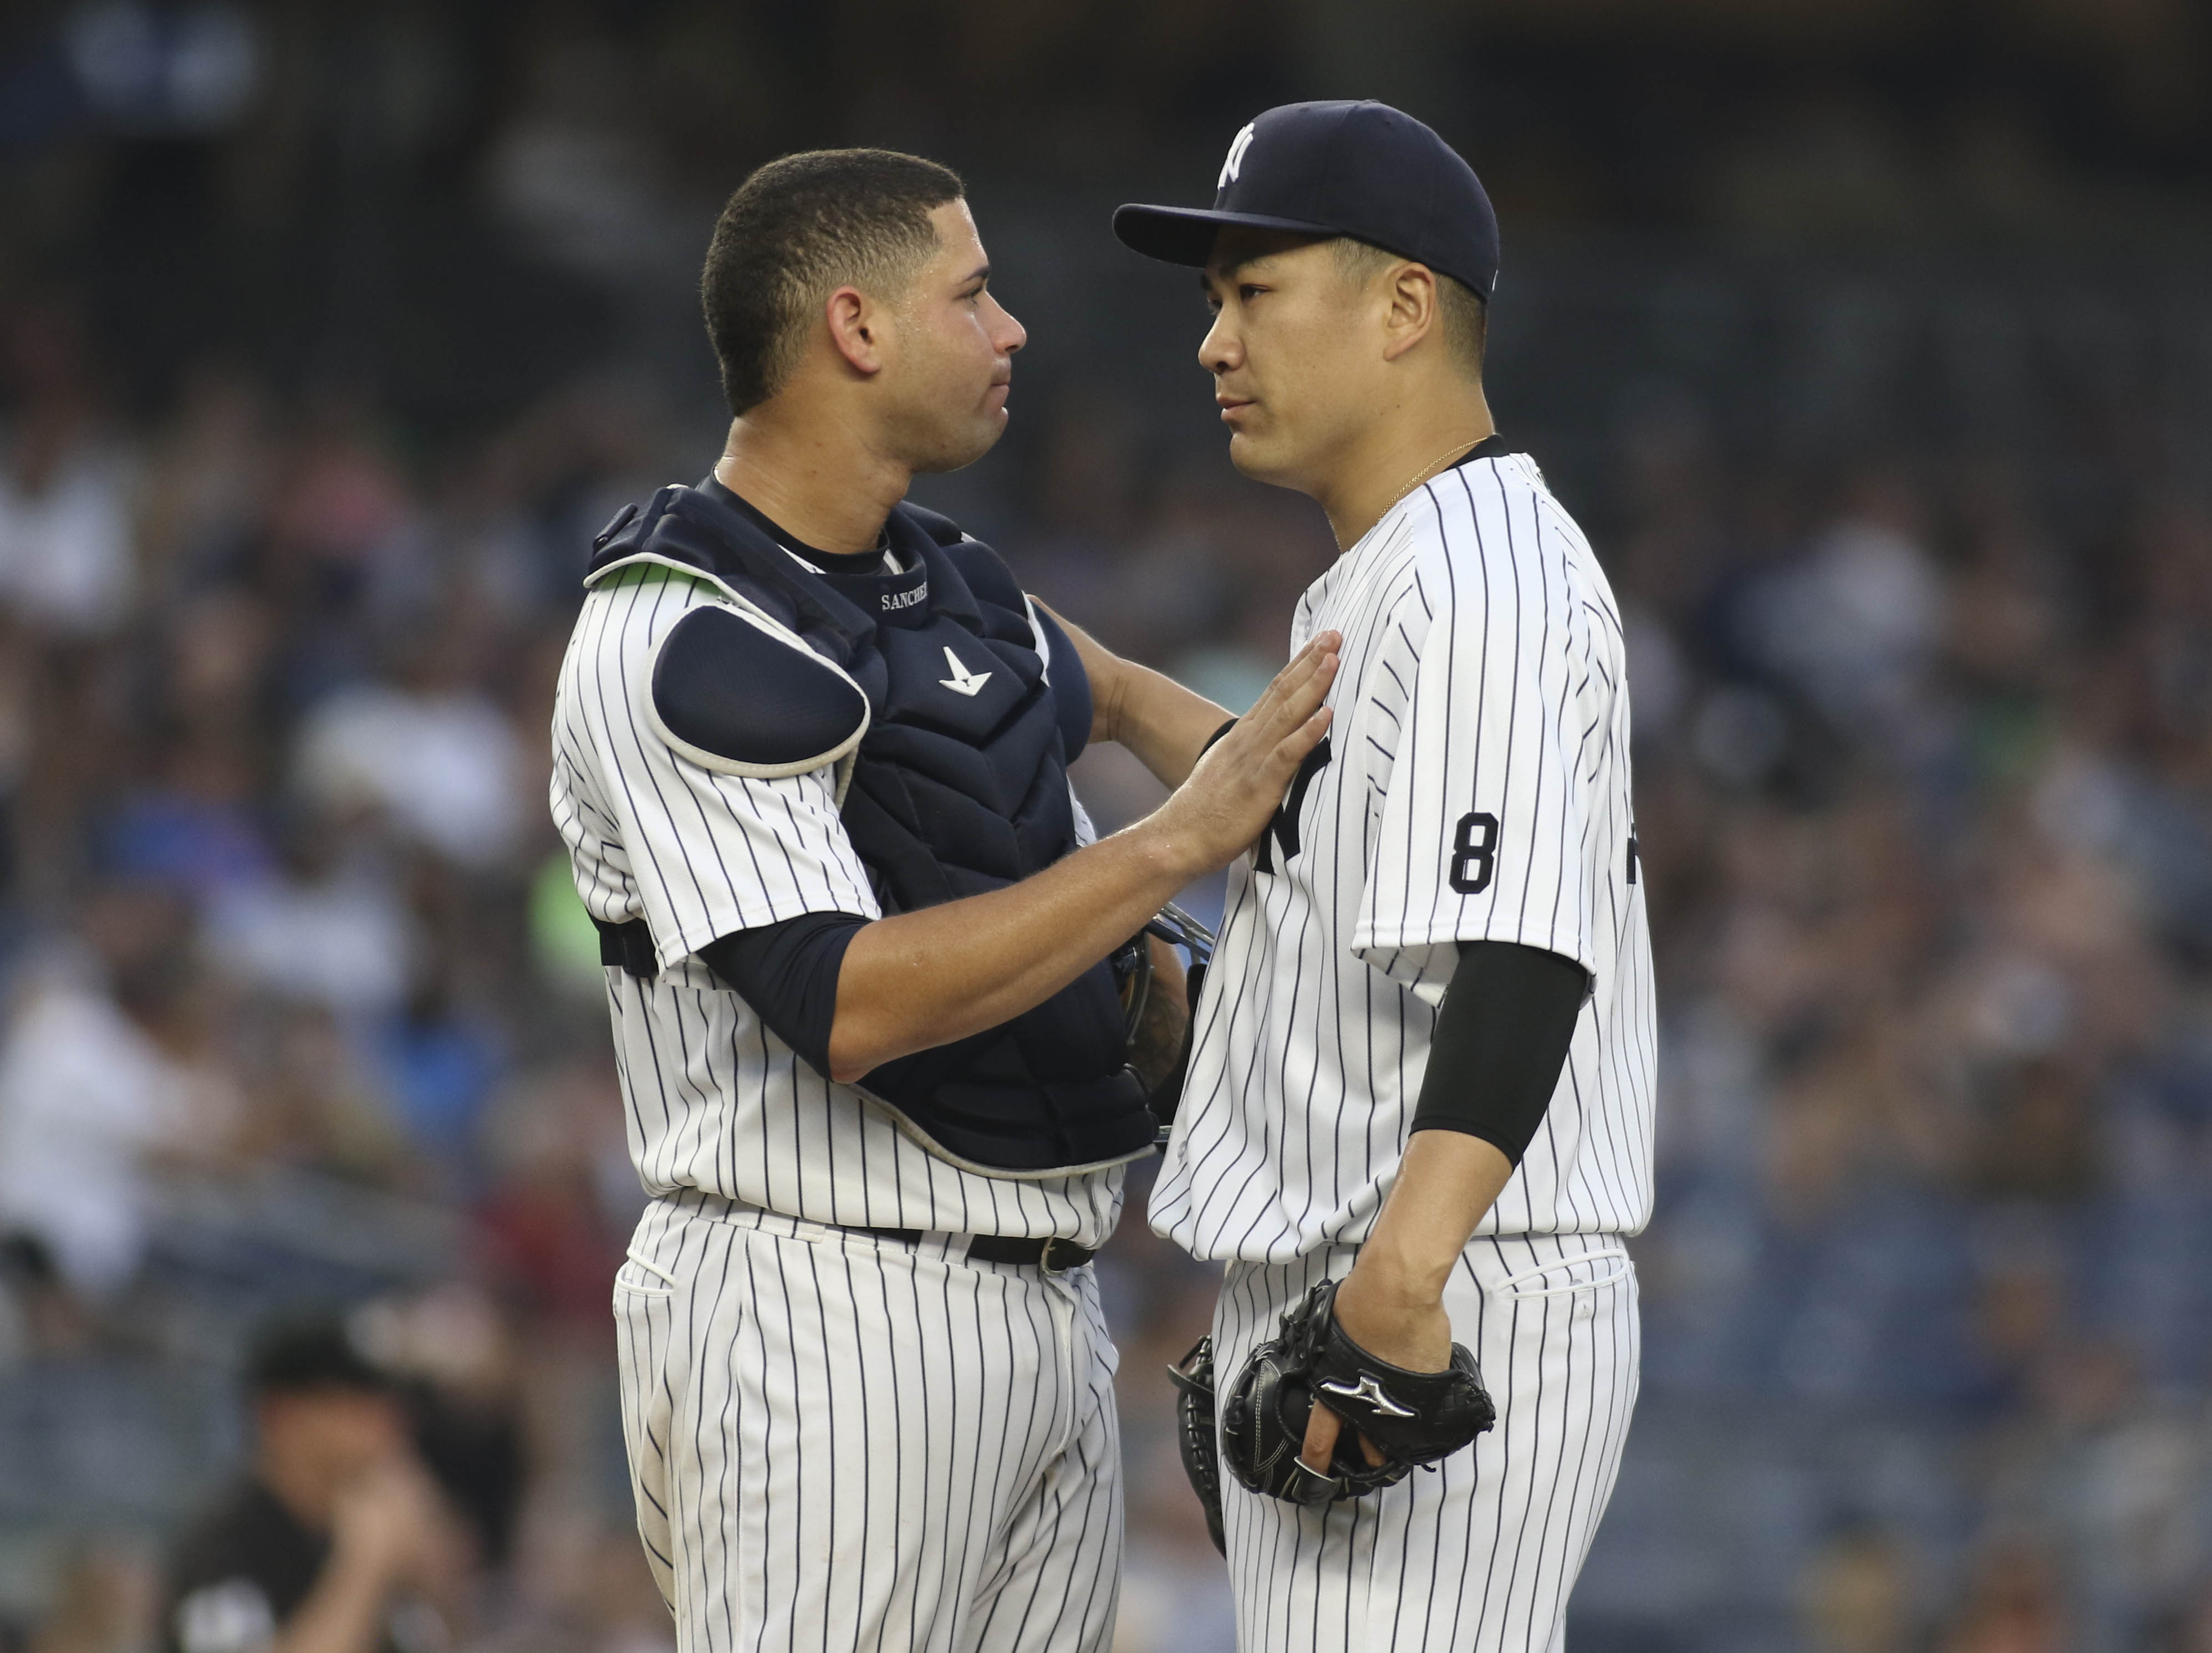 New York Yankees catcher Gary Sanchez, right, and relief pitcher